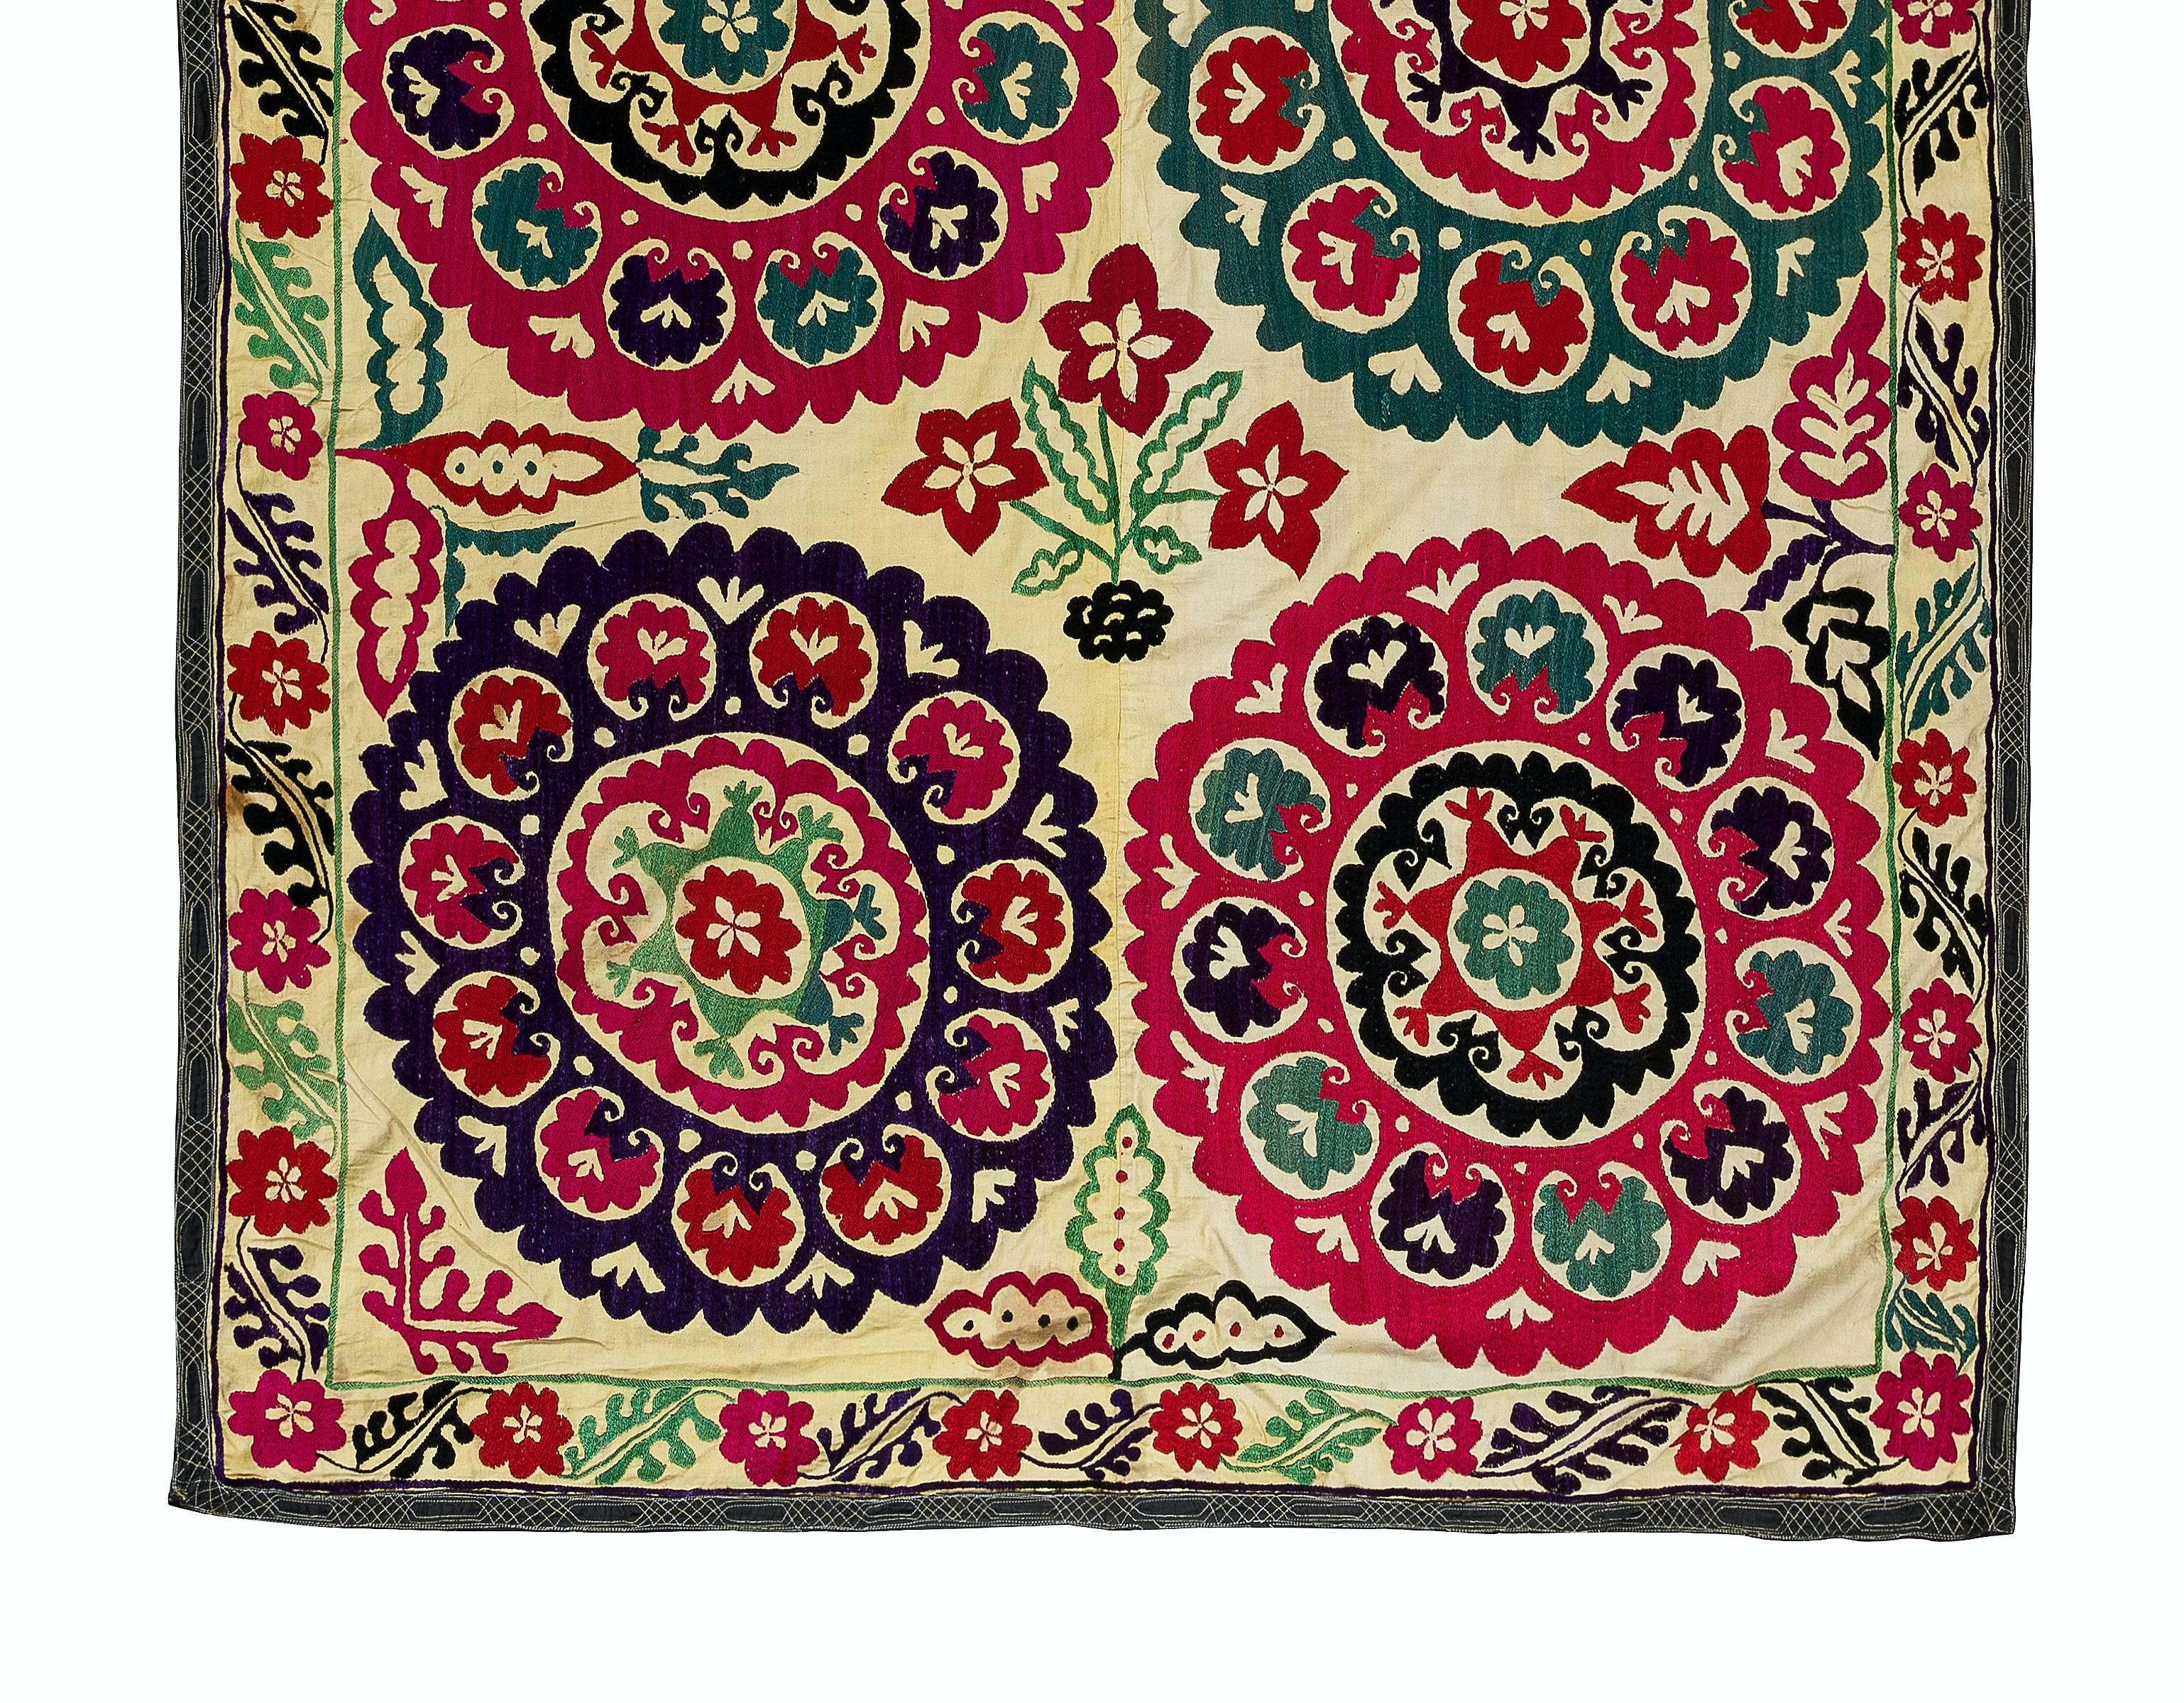 Uzbek 4.7x7.4 Ft Silk Embroidery Wall Hanging, Suzani Tablecloth, Vintage Bedspread For Sale